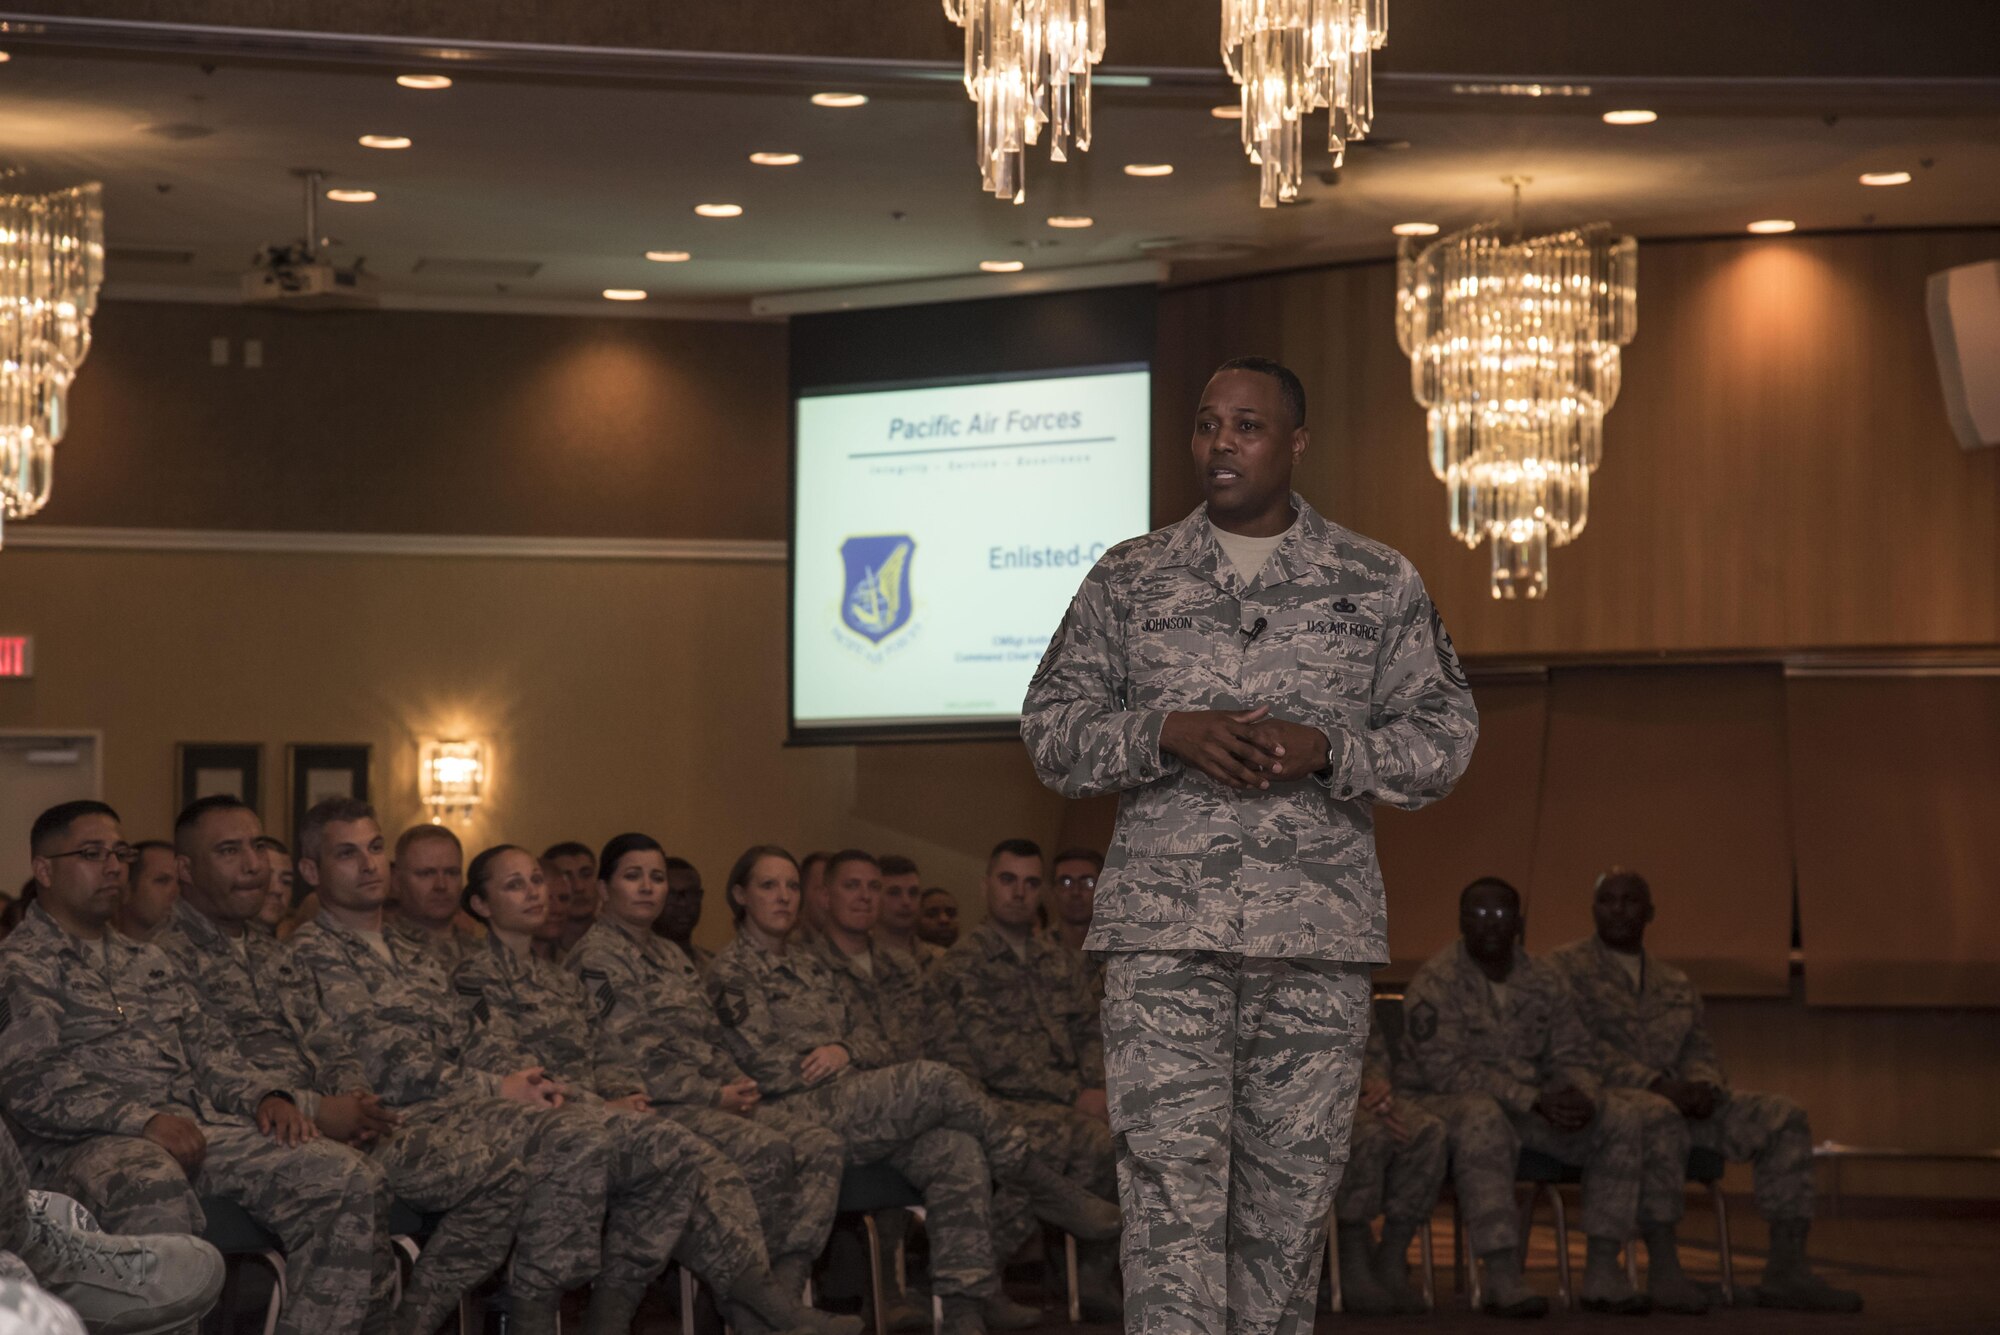 U.S. Air Force Chief Master Sgt. Anthony Johnson, the Pacific Air Forces' command chief, speaks during an elisted all call at Misawa Air Base, Japan, July 12, 2017. Johnson is touring all bases withing the PACAF major command to familiarize himself with each unit and identify challenges preventing Airmen from performing at their optimal level. (U.S. Air Force photo by Airman 1st Class Sadie Colbert)